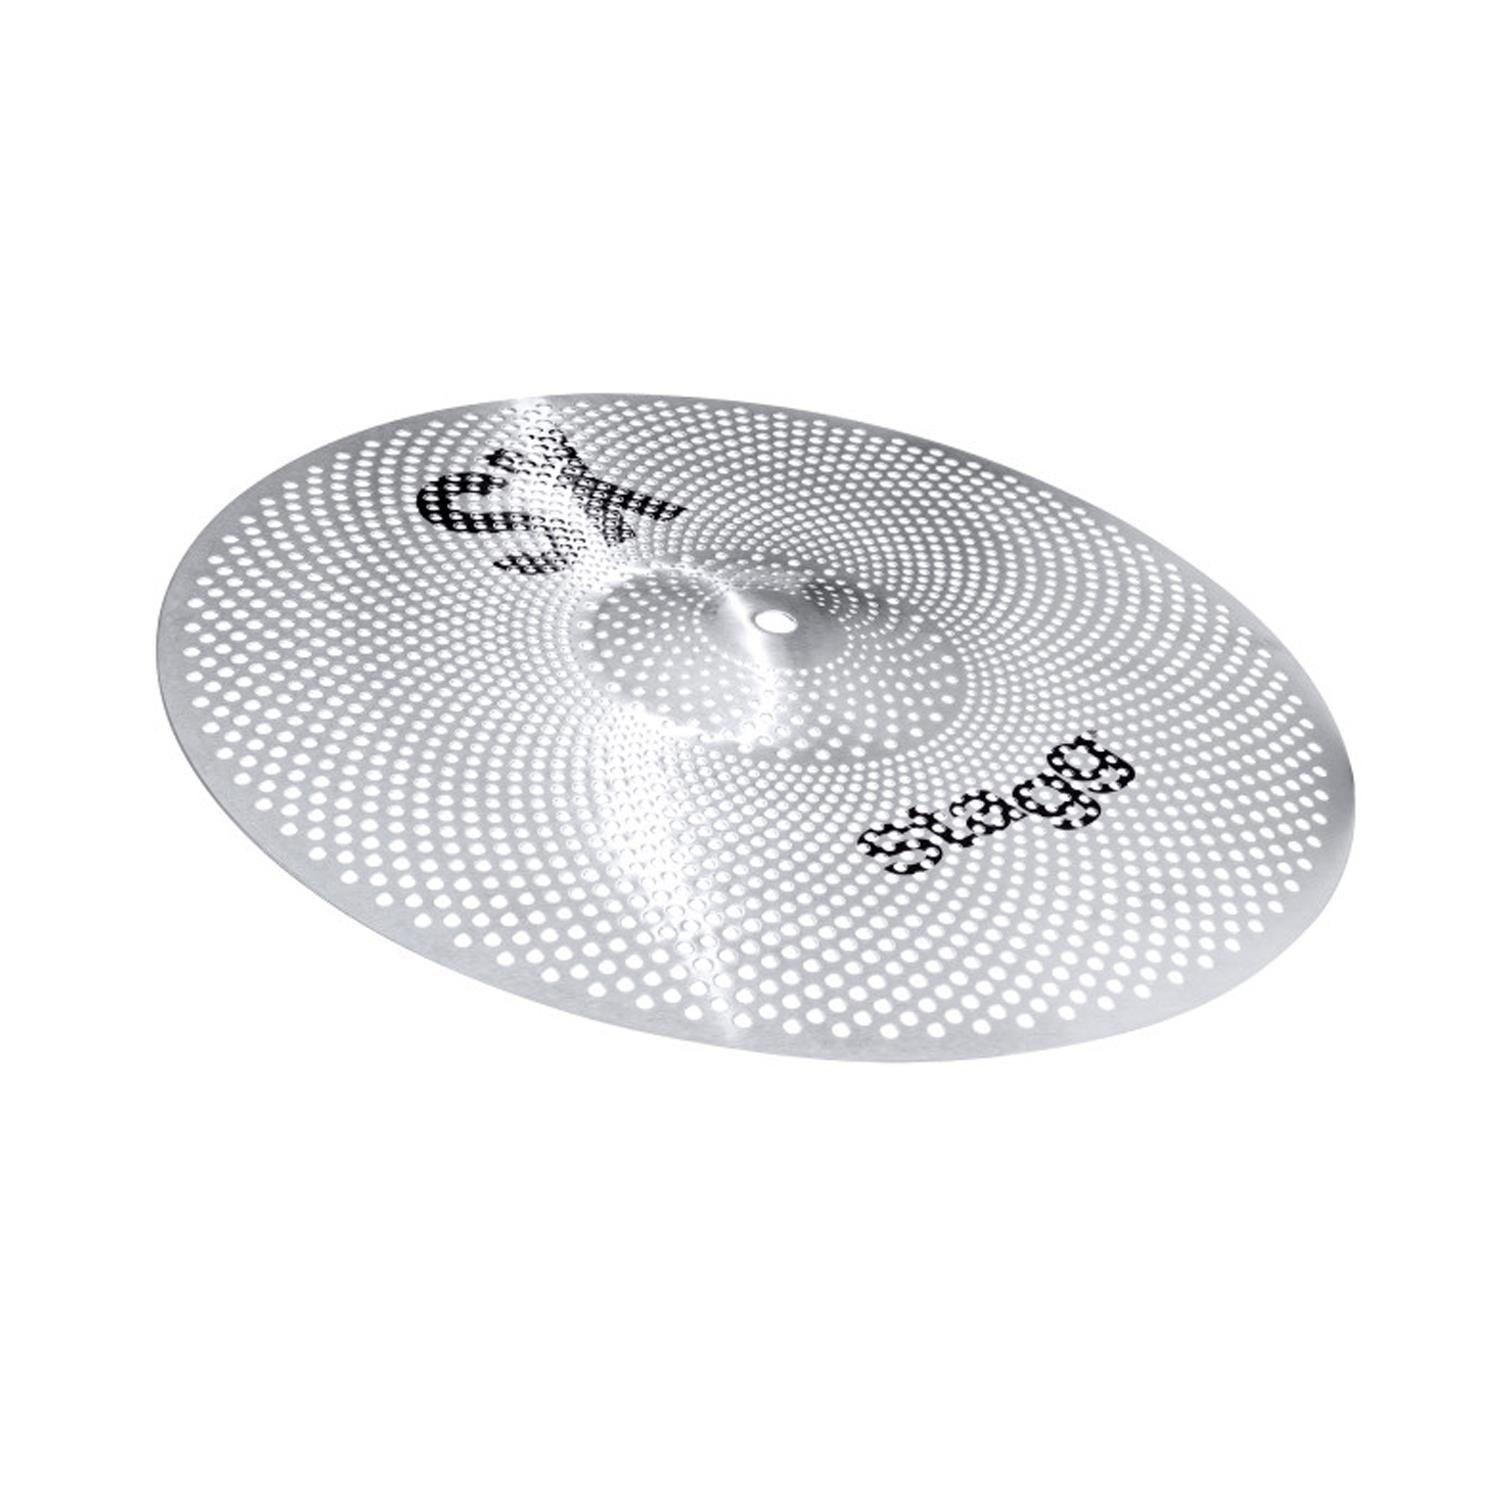 Stagg SXM-RM20 20" Low Volume Silent Practice Cymbal Ride - DY Pro Audio